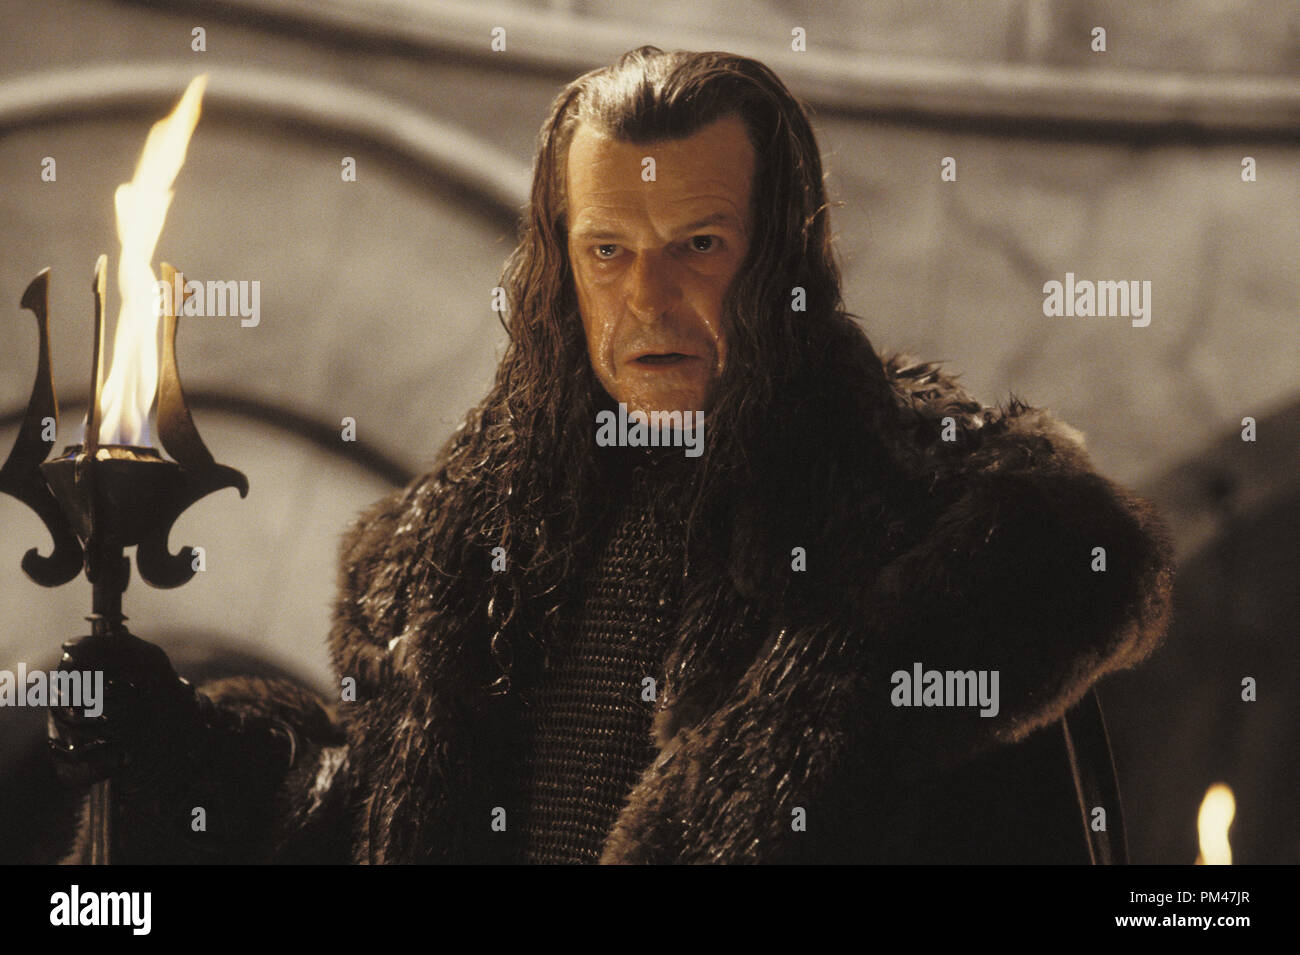 Newline Pictures Presents "Lord of the Rings: The Return of the King" John Noble © 2003 New Line Photo by Pierre Vinet Stock Photo